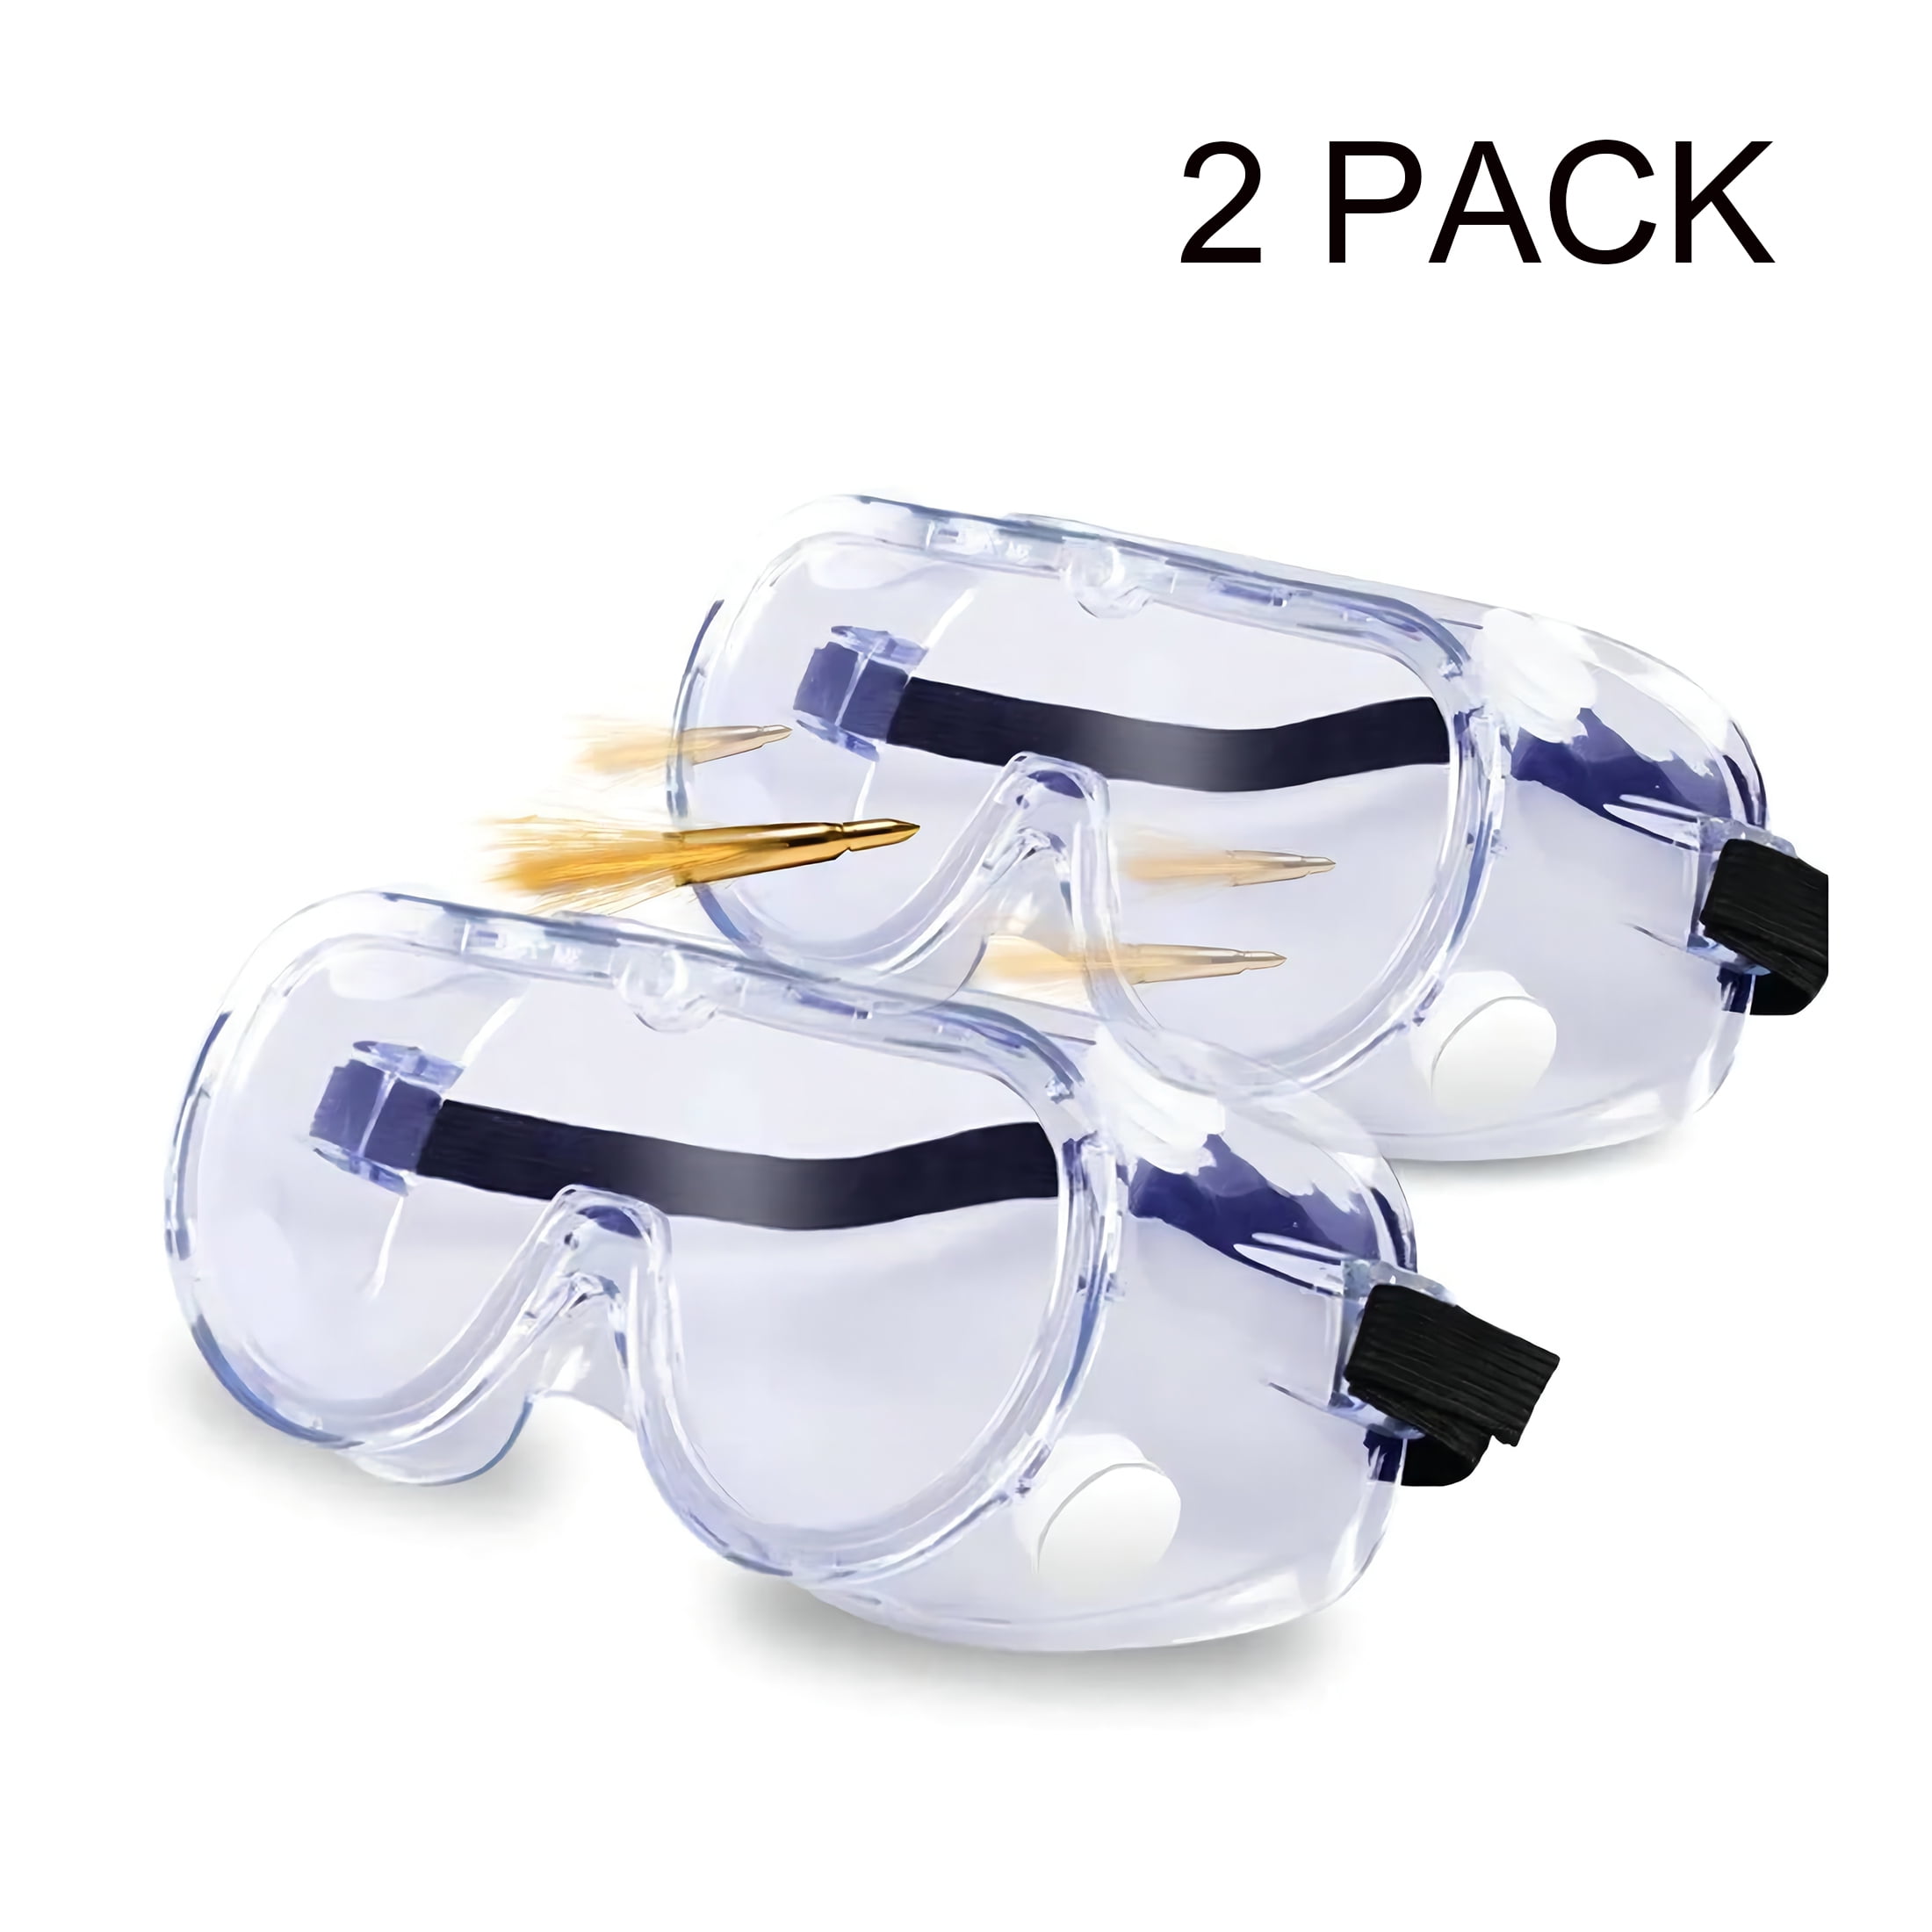 HQRP Clear Tint Protective Safety Glasses Goggles for Lab Chemistry courses Science class in School High School College Laboratory work 